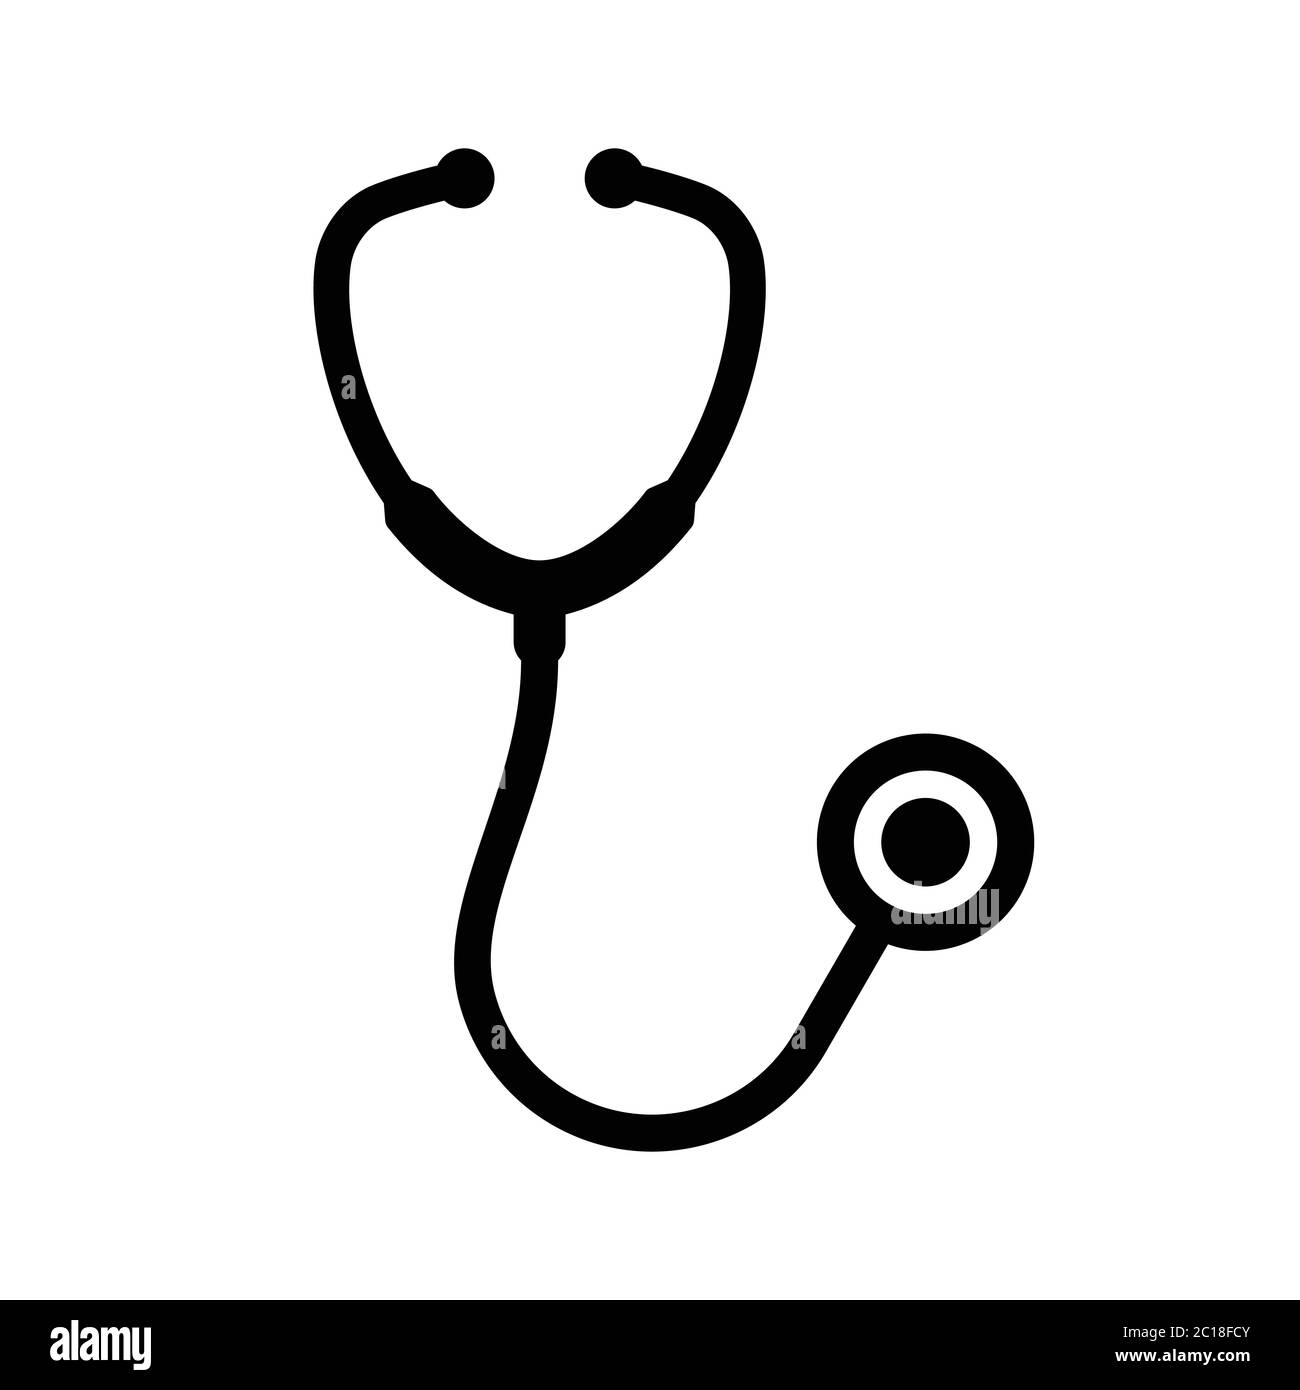 Solid simple stethoscope icon doctor equipment to examine the patient medical condition Stock Vector